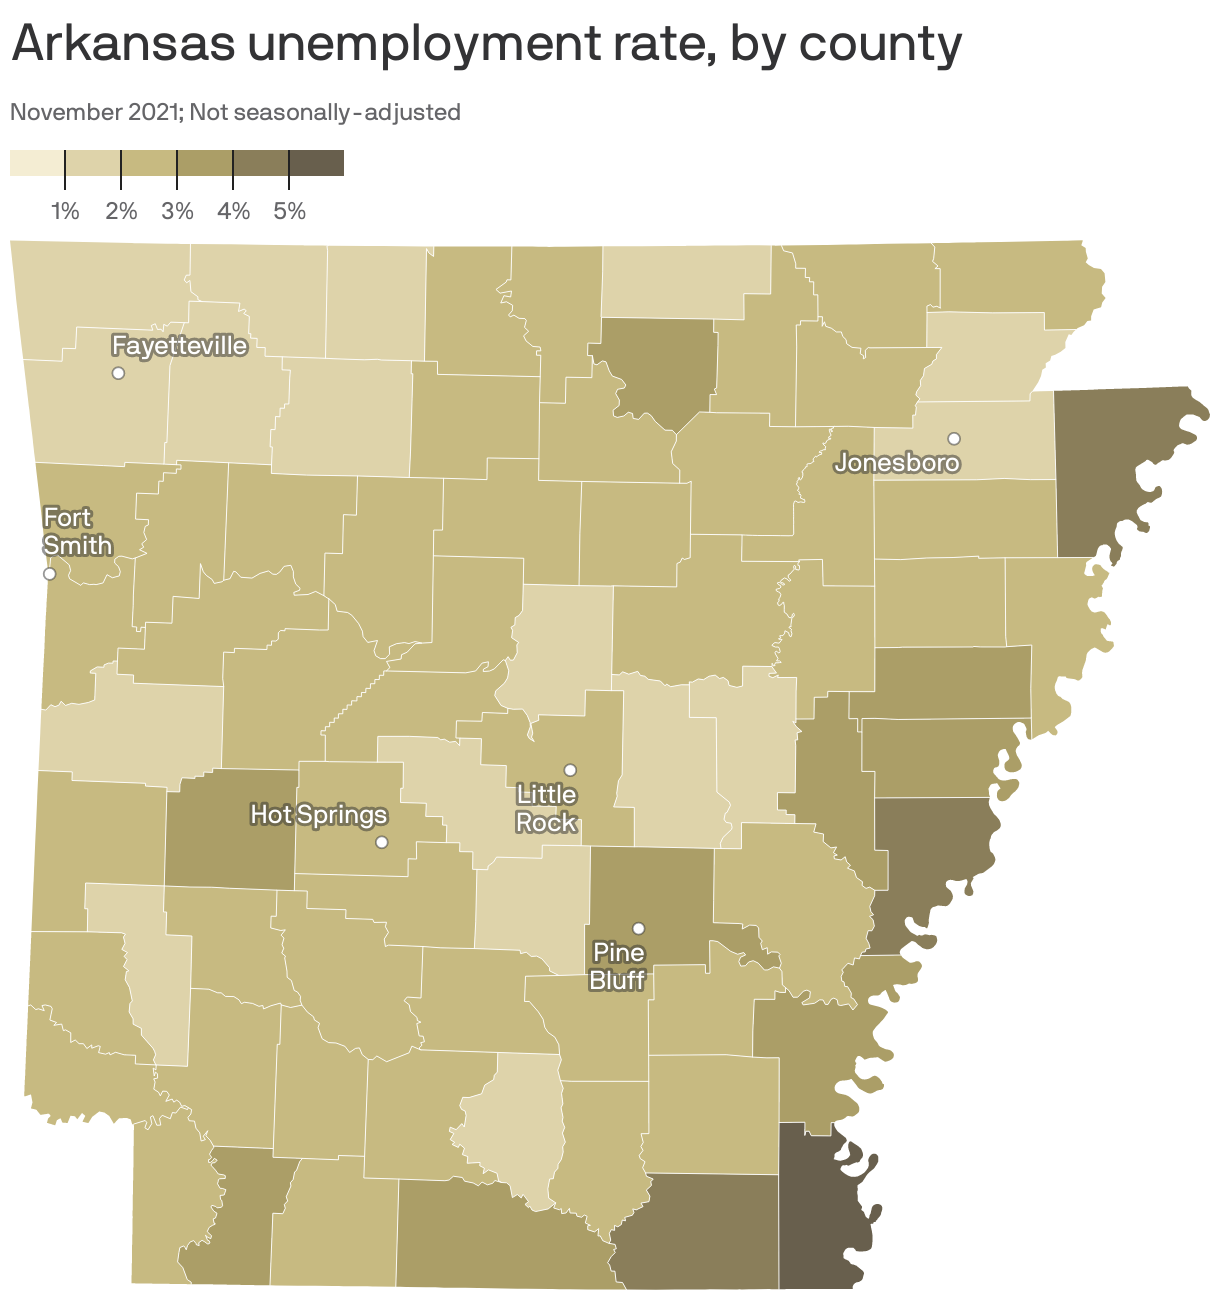 Arkansas unemployment rate, by county